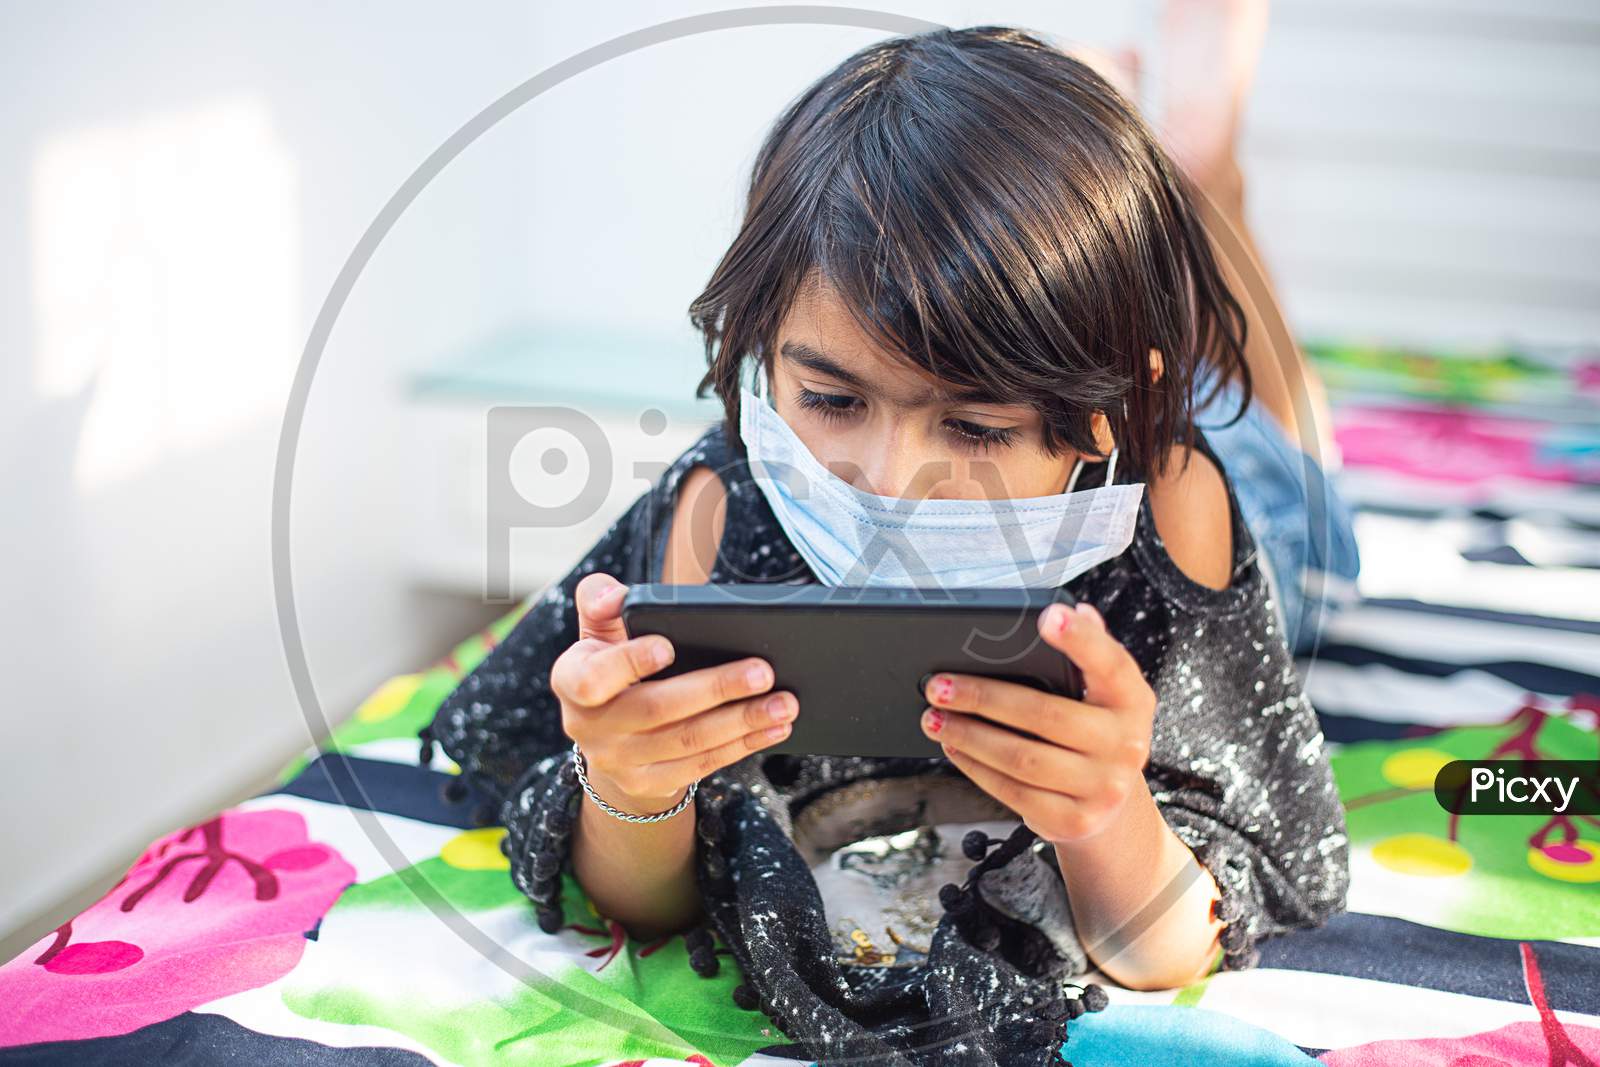 Young Preschool Girl Wearing Mask Lying Down On A Bed In A Relaxed Pose, Playing At Her Smart Phone. Staying Home During The Quarantine. Social Distance, Learning Online Education, Covid-19 Lock Down.